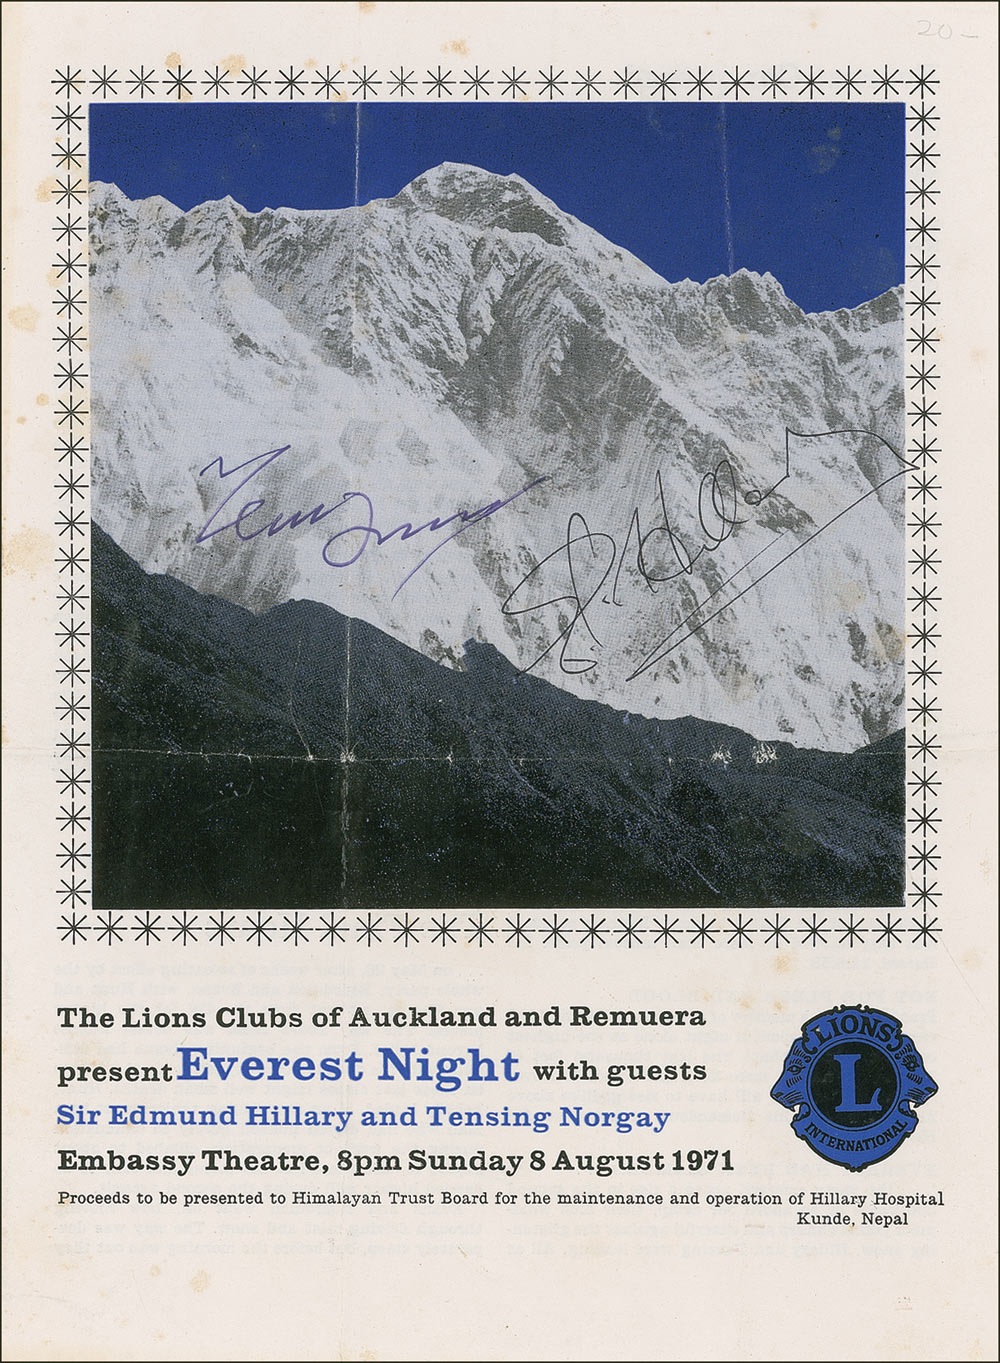 Lot #253 Edmund Hillary and Tensing Norgay